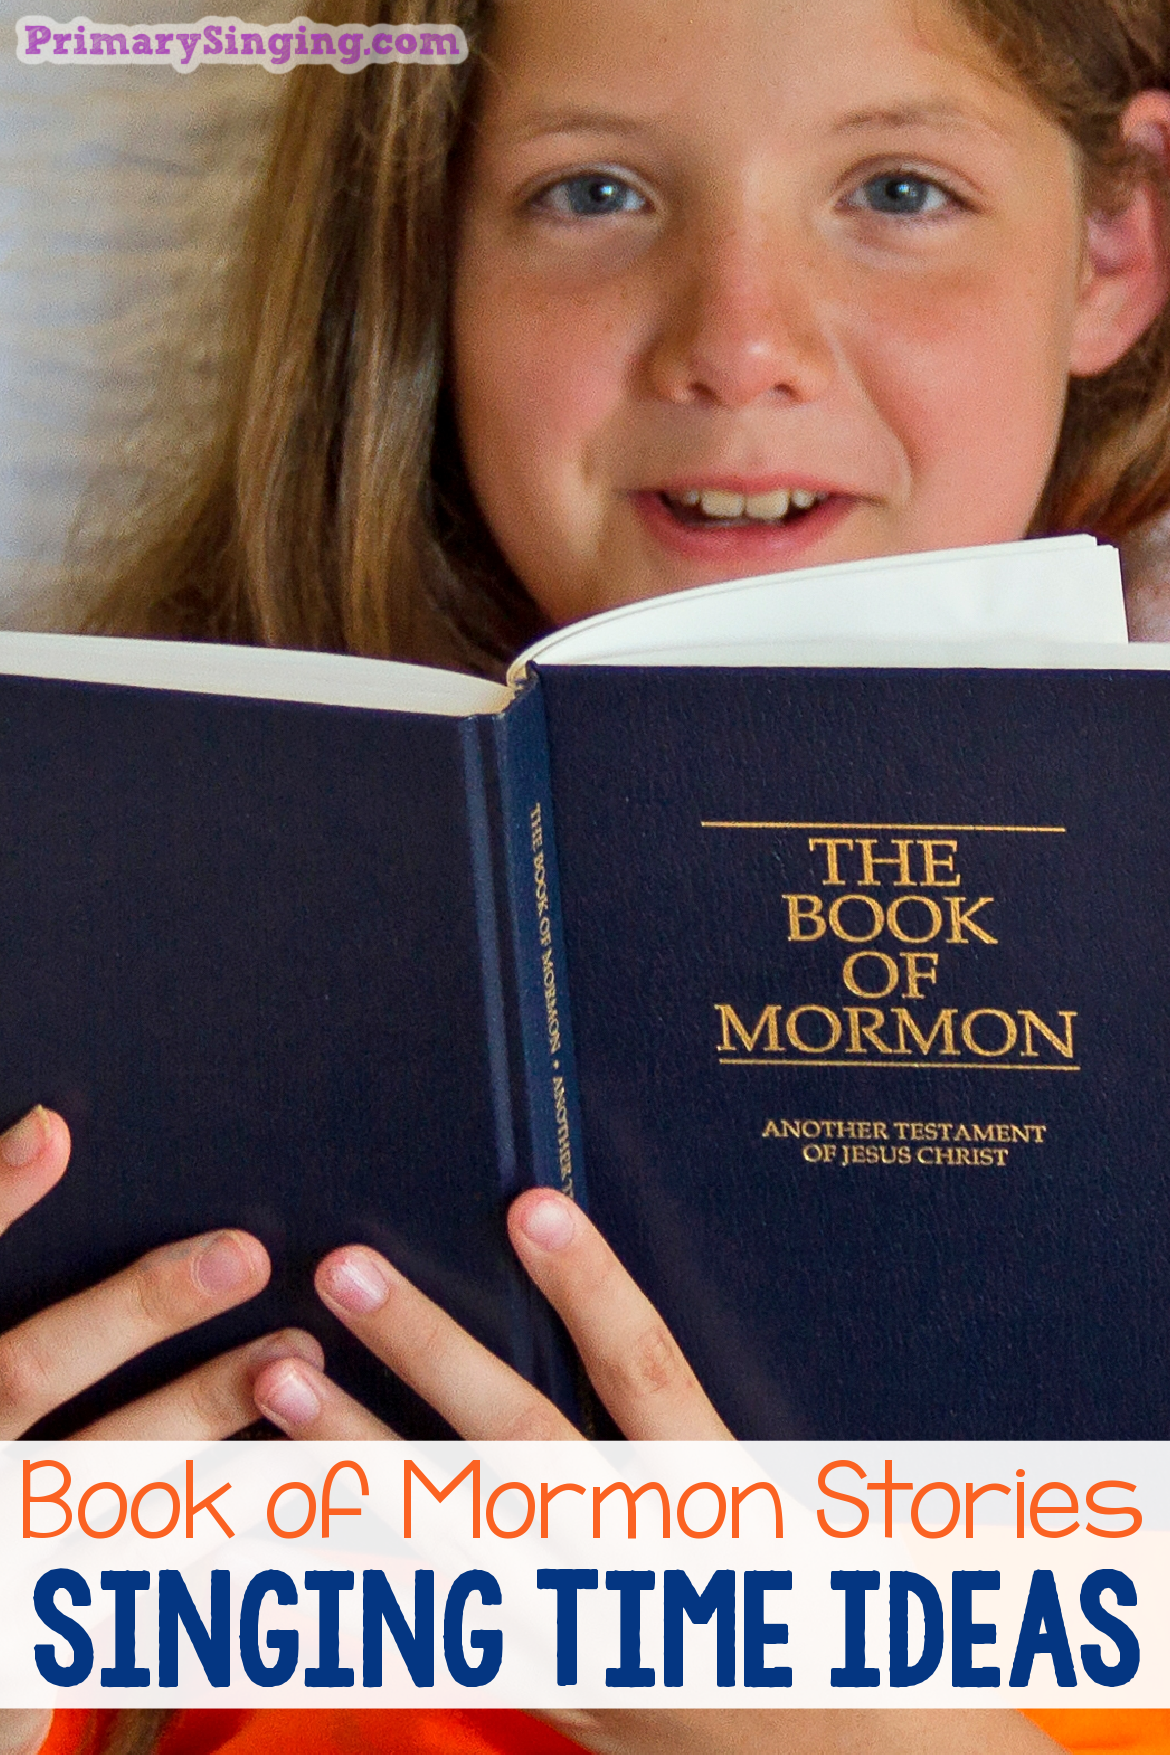 Teach Book of Mormon Stories with these fun and engaging Singing Time Ideas for LDS Primary Music Leaders - a fun assortment of activities and lesson plans.